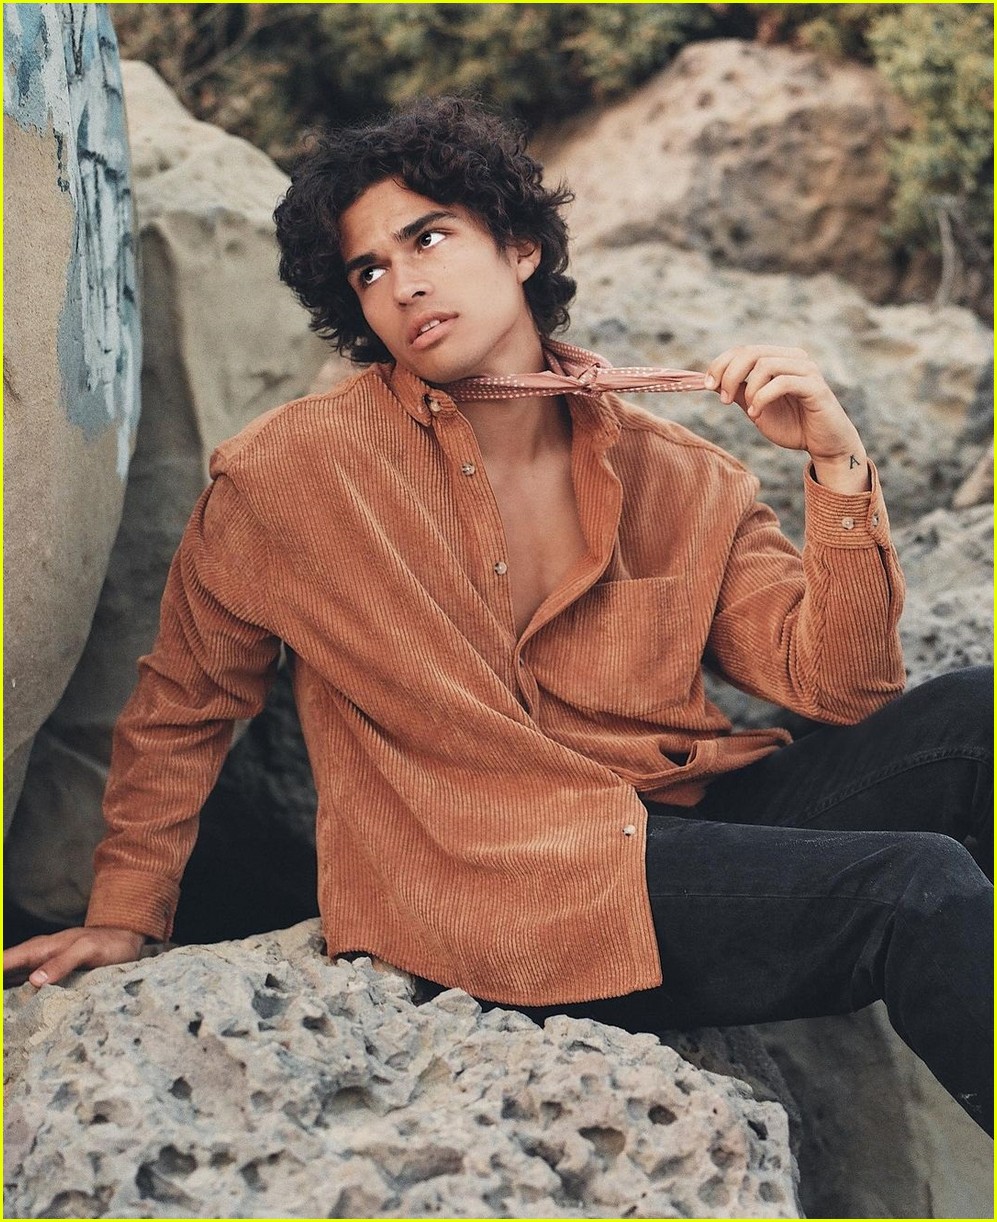 learn more about singer turned actor alex aiono with 10 fun facts 01